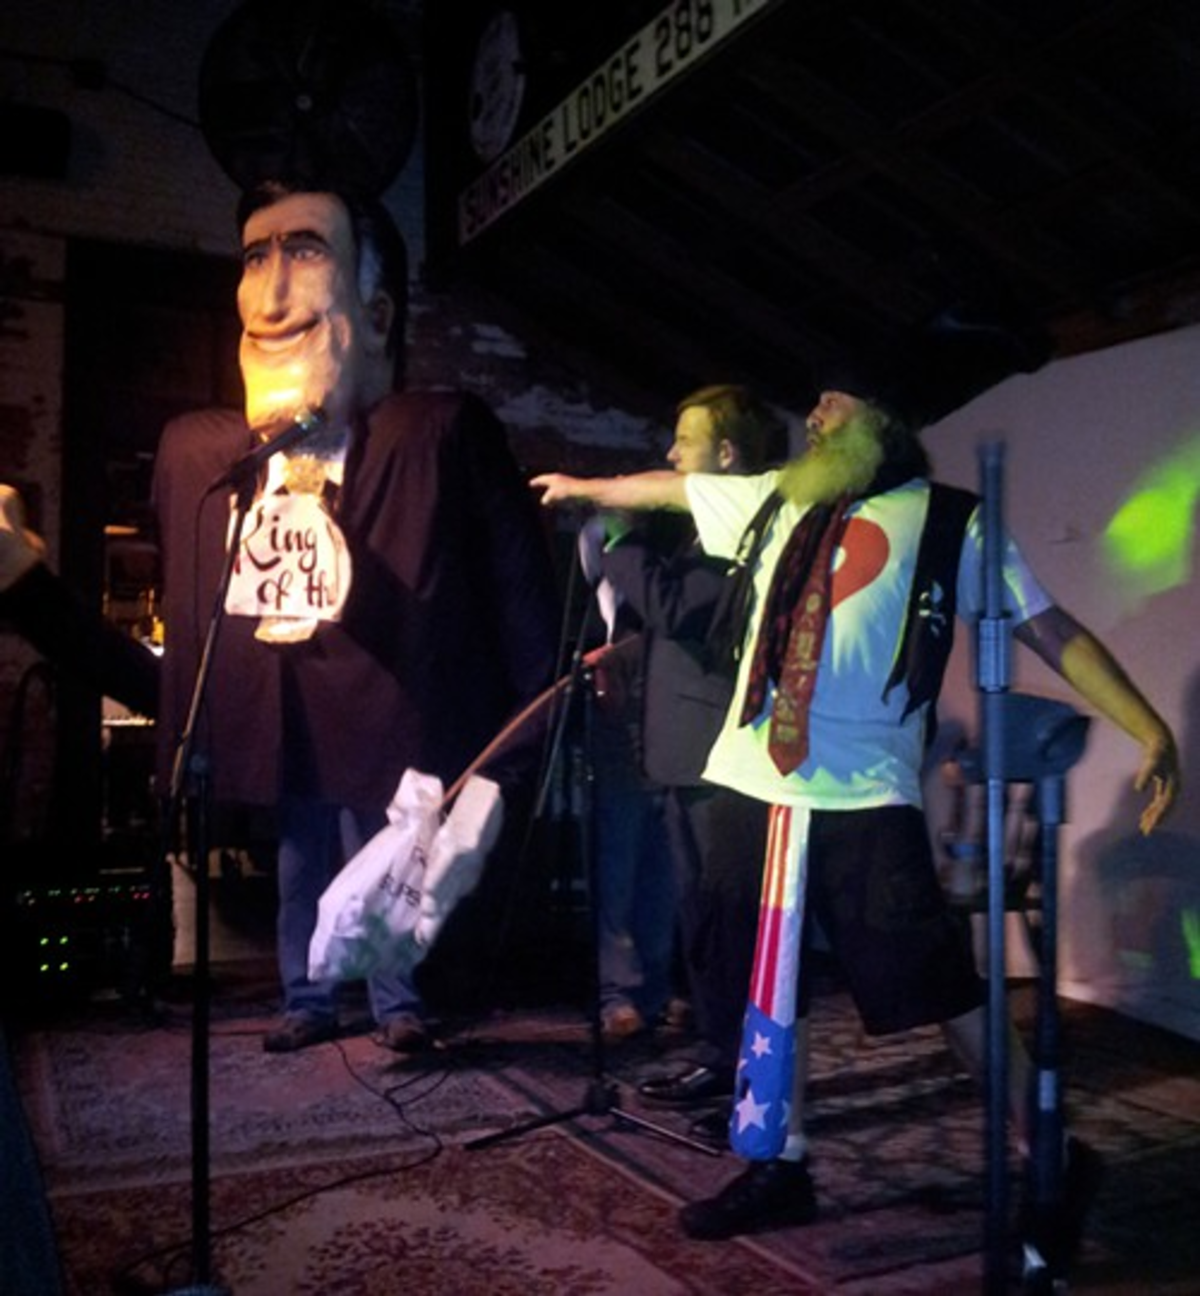 During the RNC 2012, Vermin Supreme challenges "Ritt Momney" at the Festival of Resistance at New World Brewery.